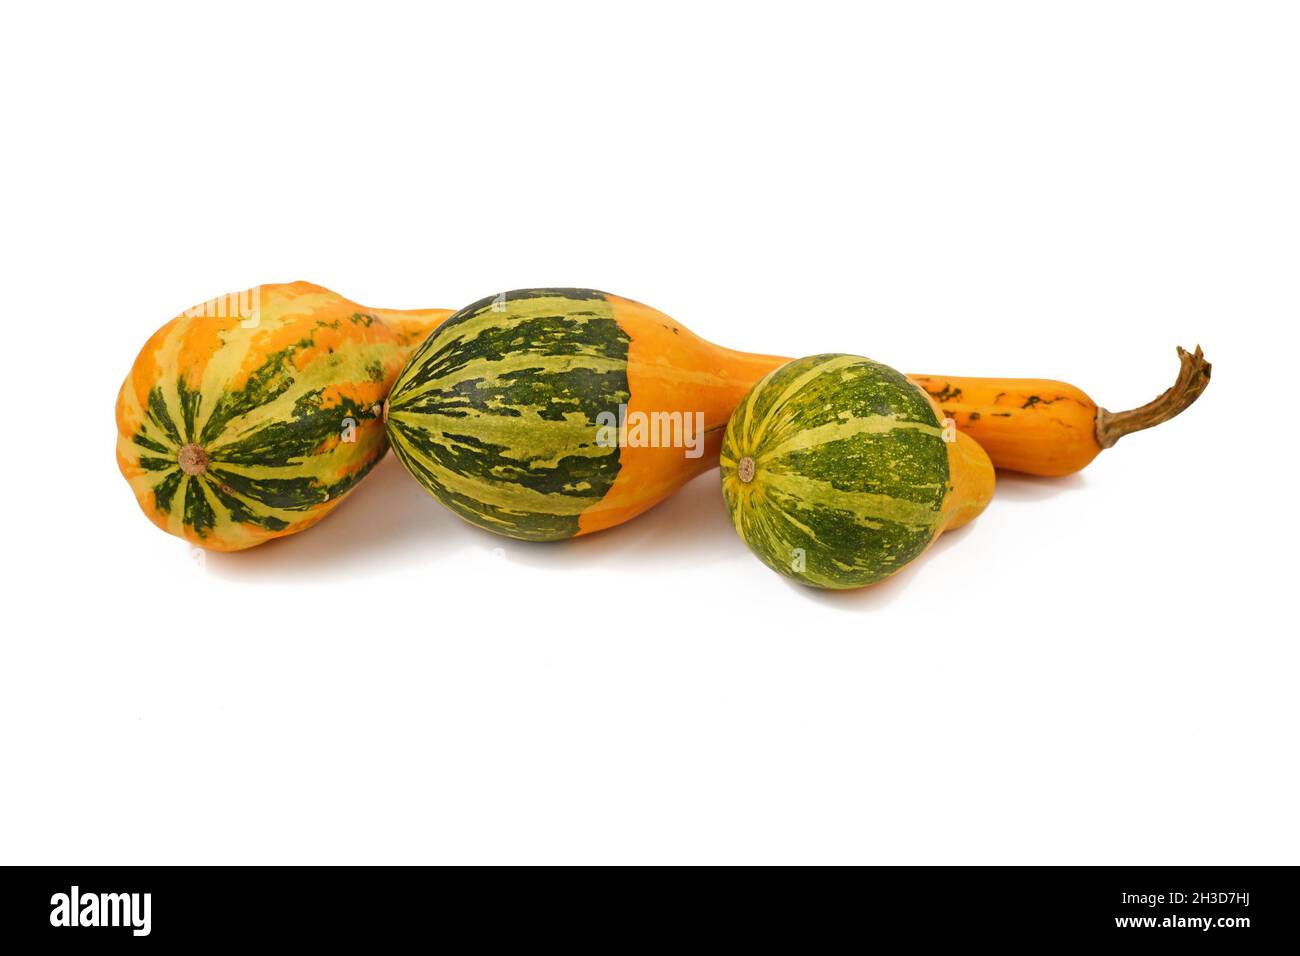 Three yellow and green crookneck gourds on white background Stock Photo